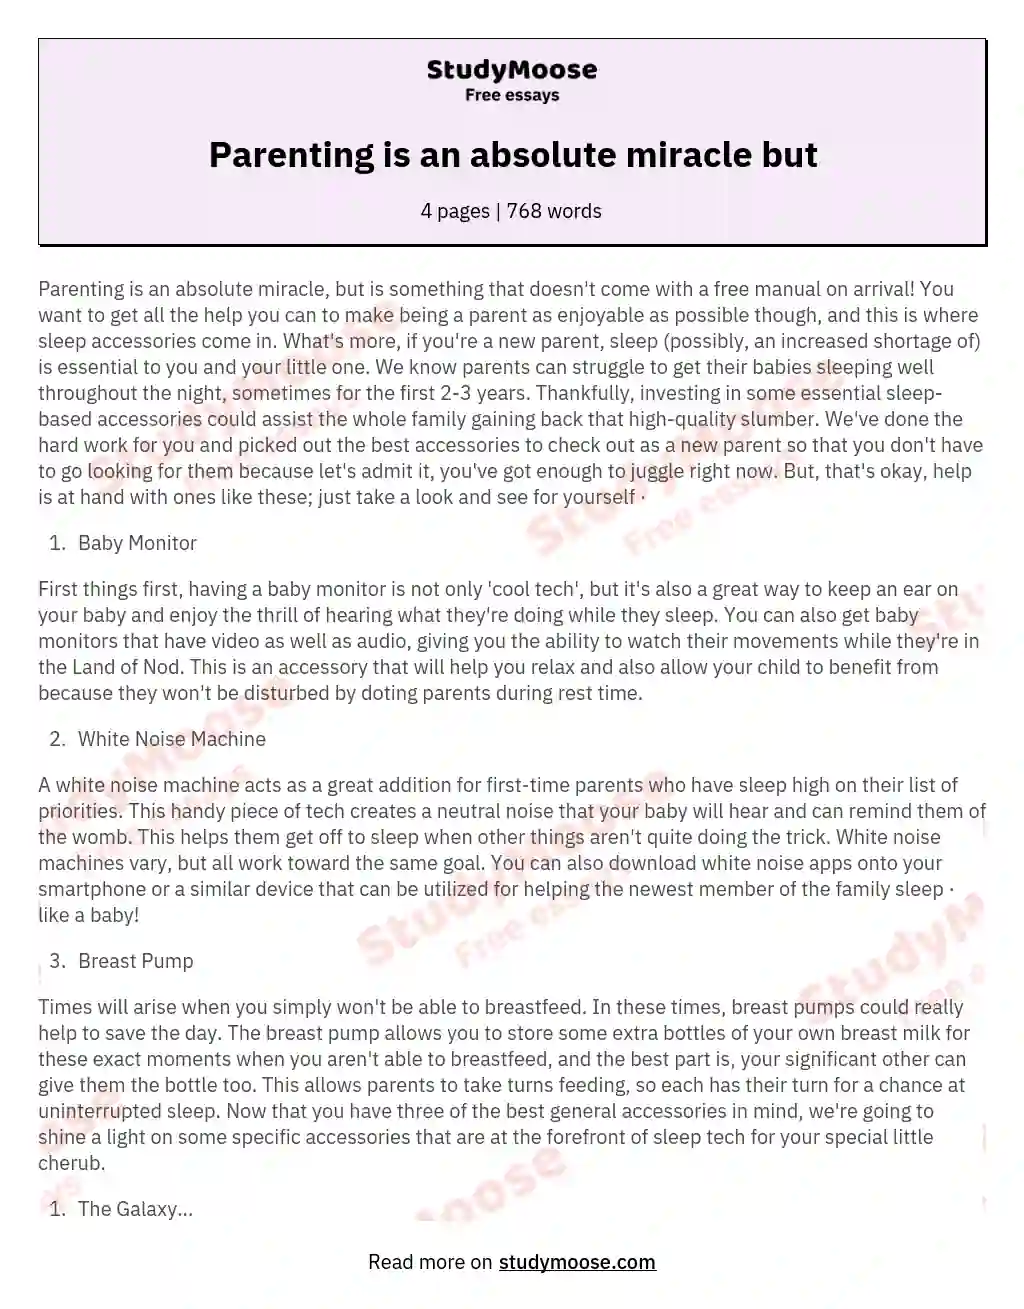 Parenting is an absolute miracle but essay